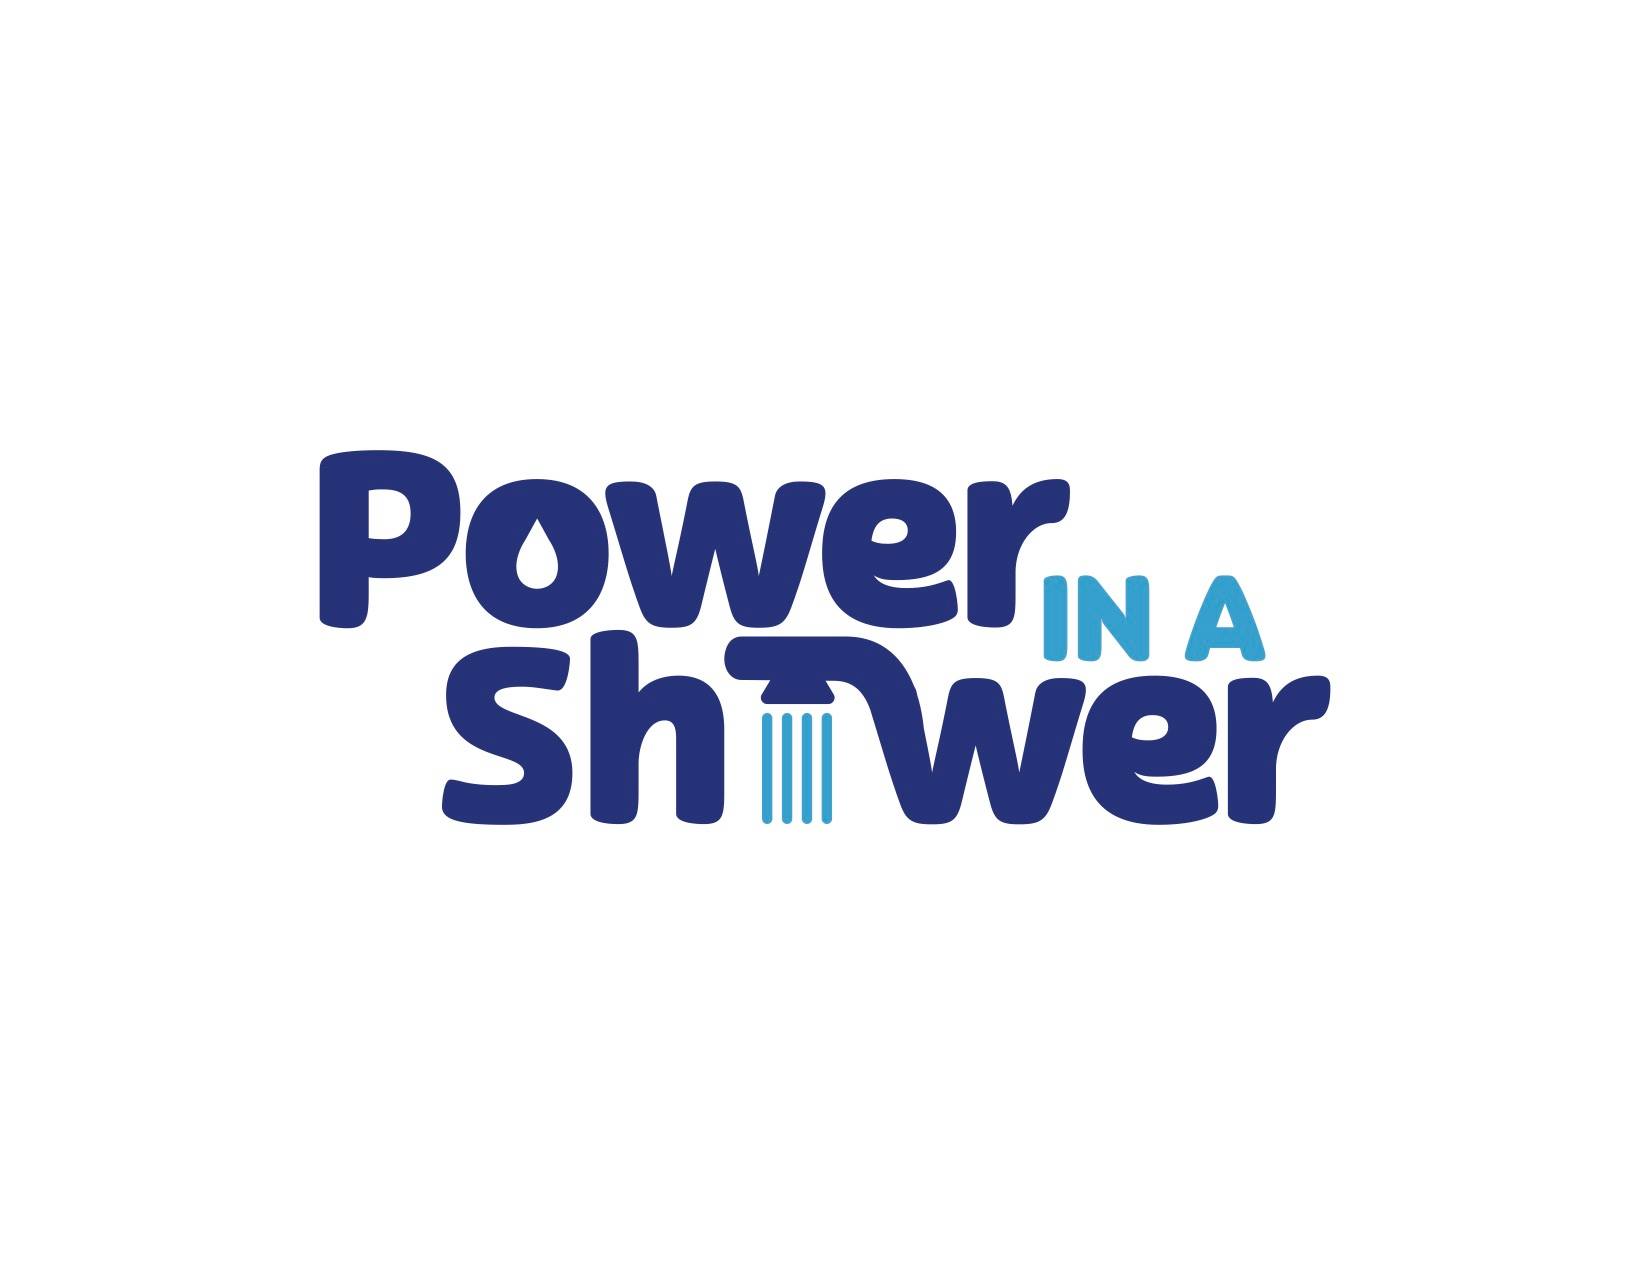 Power in a Shower